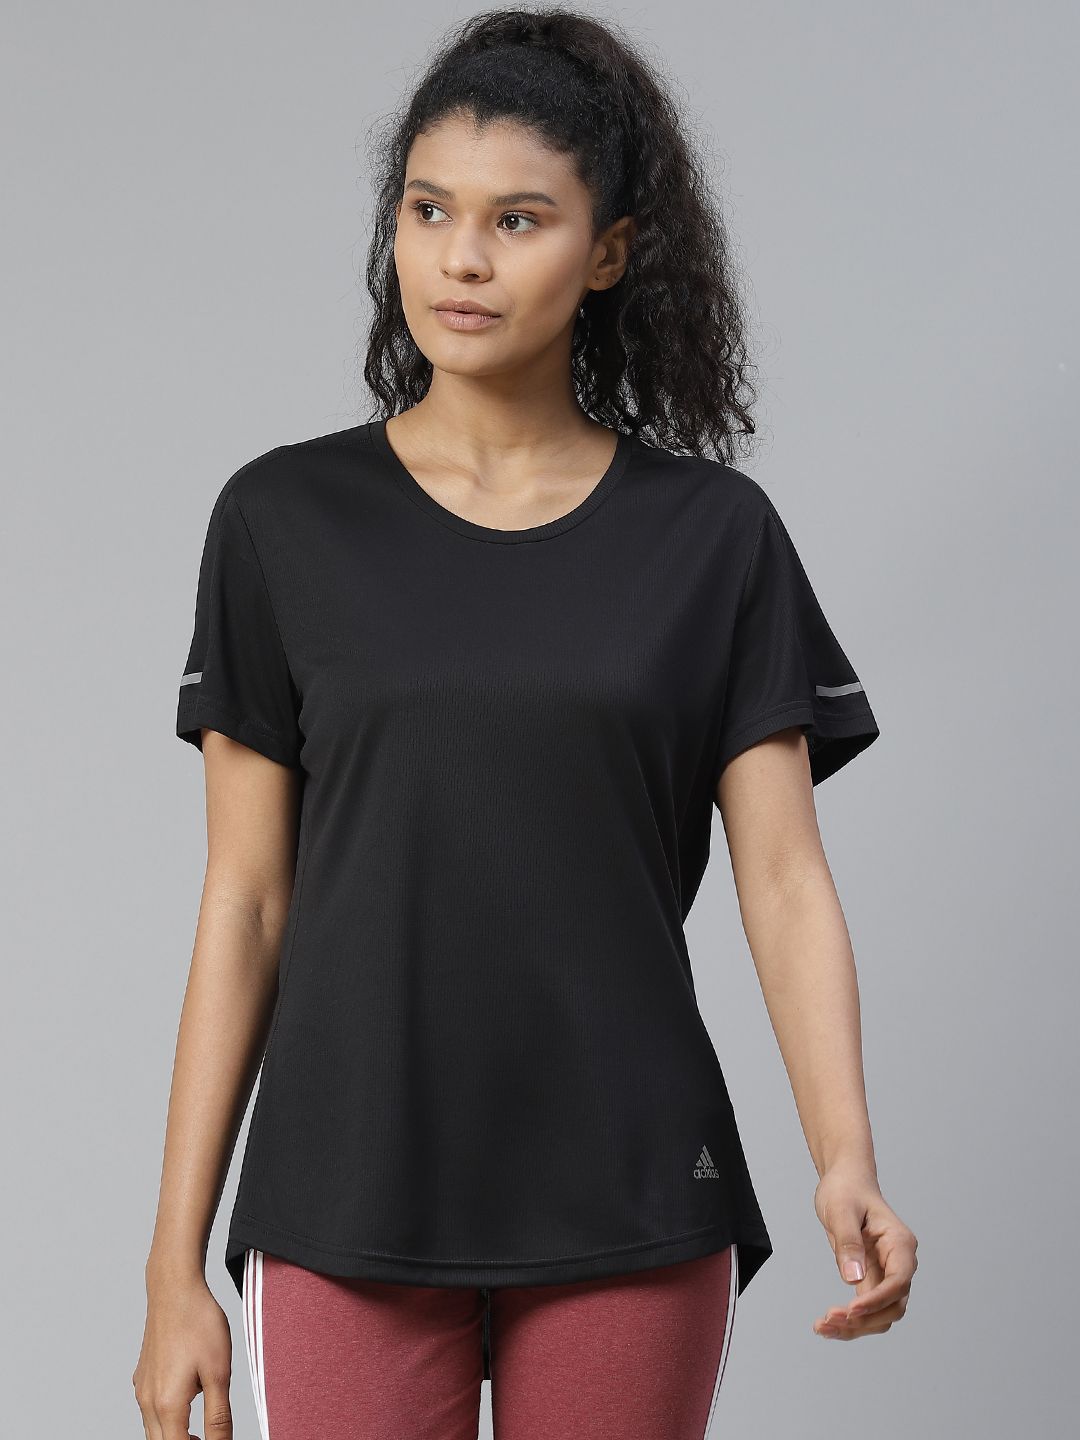 ADIDAS Women Black Solid Run IT Sustainable T-shirt Price in India